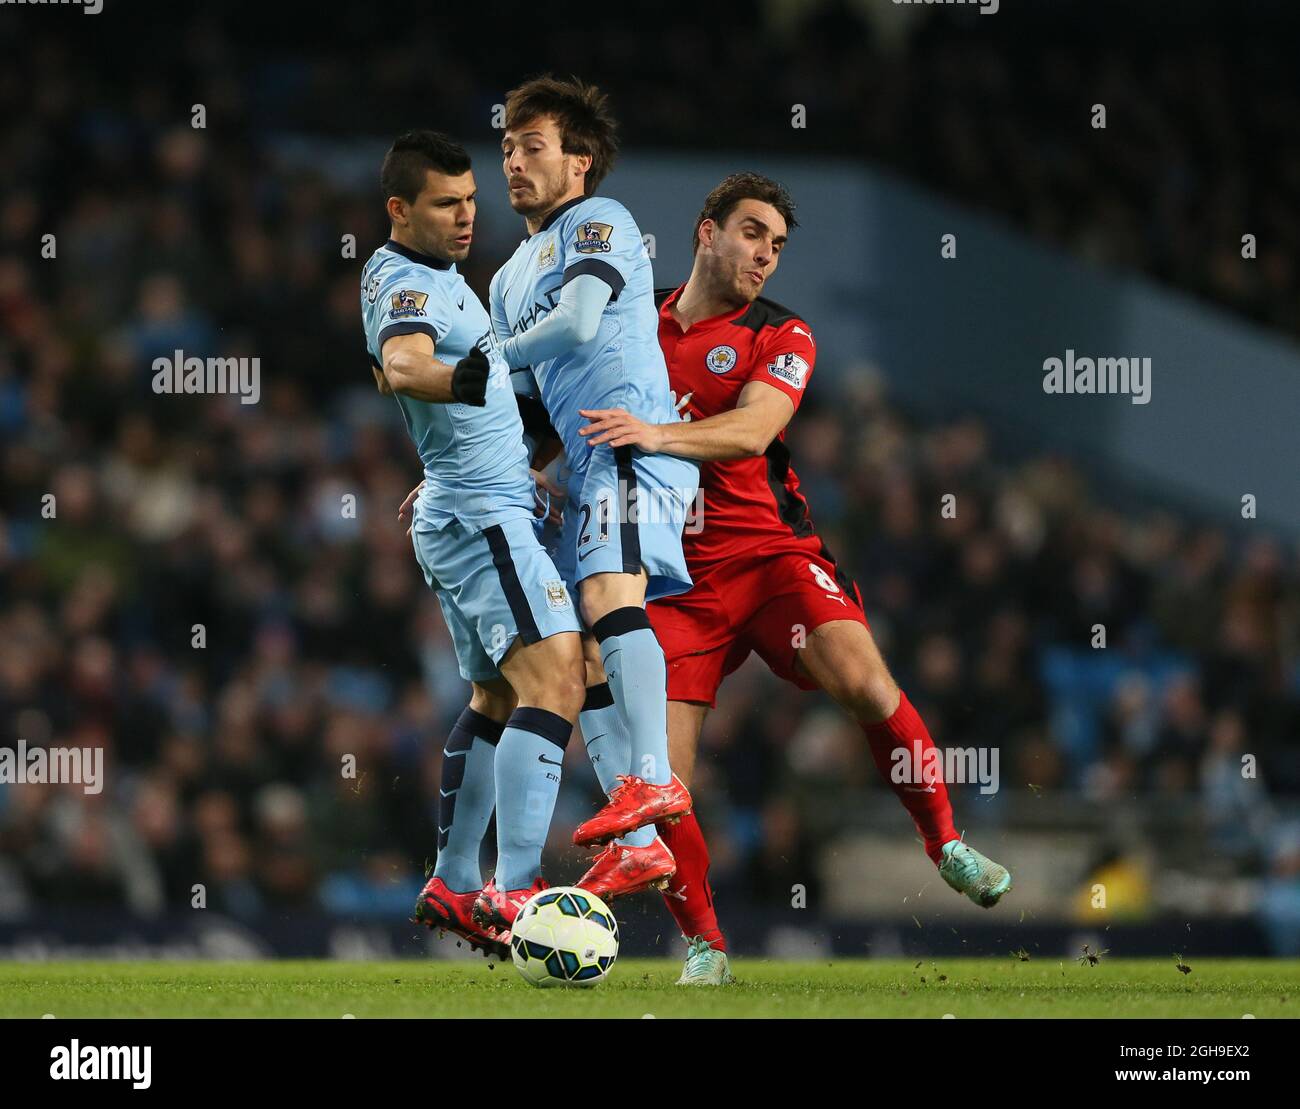 Sergio Aguero of Manchester City and David Silva of Manchester City get in each others way during the Barclays Premier League match between Manchester City and Leicester City at the Etihad Stadium, Manchester, England on 4th March 2015. Picture Simon Bellis. Stock Photo